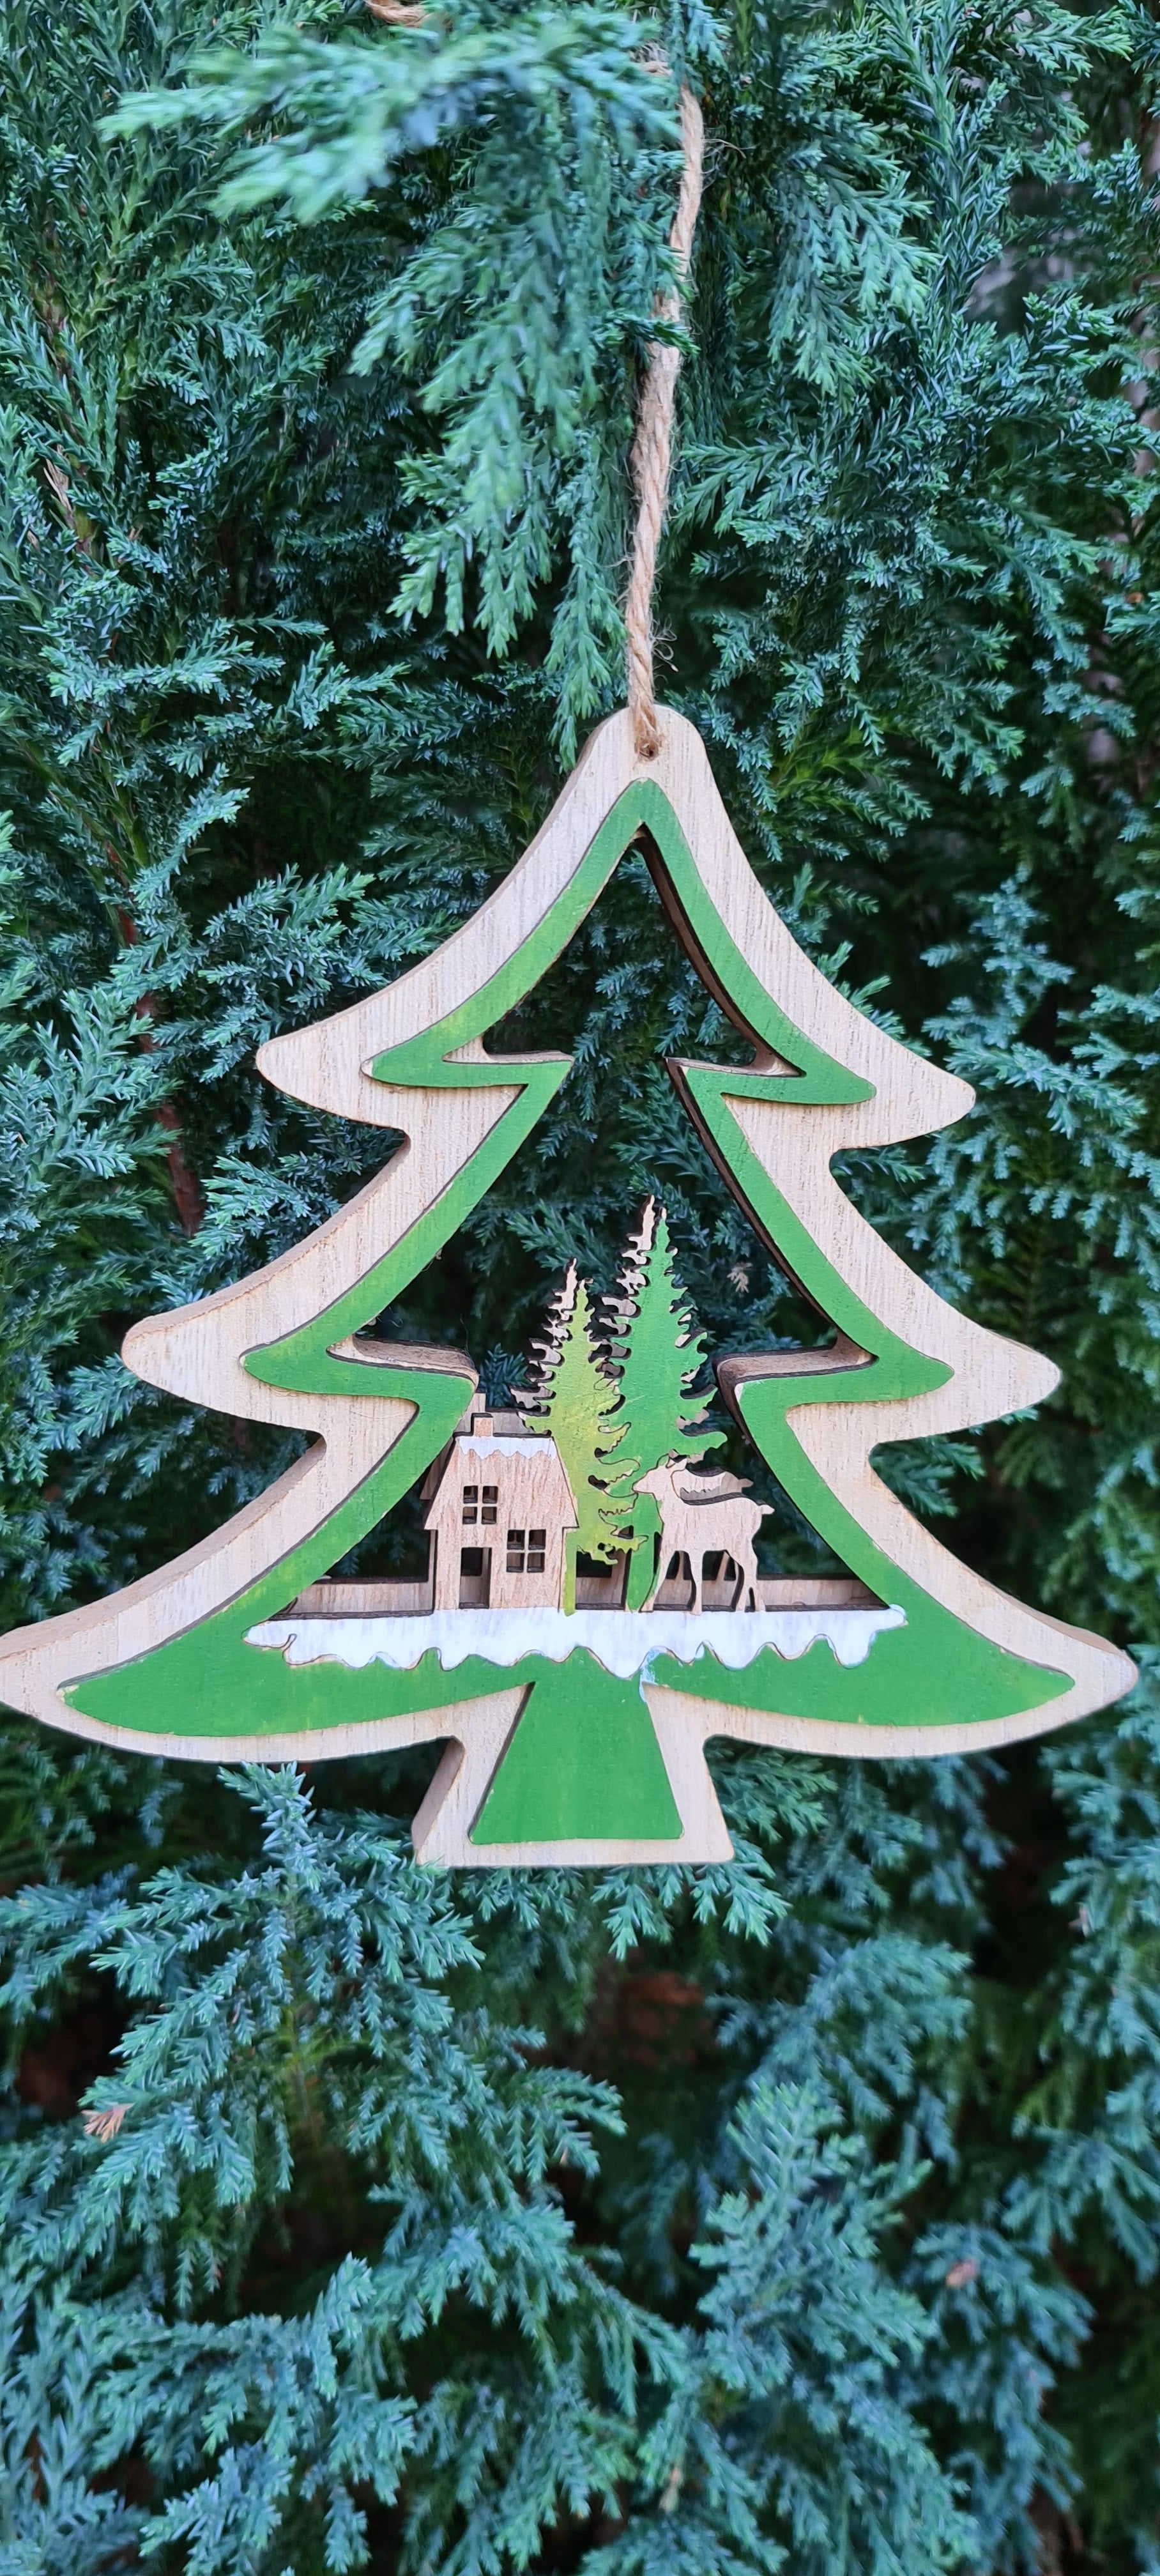 Large 3D Wood Christmas Tree Ornament with Hand-painted Winter Wonderland Scene